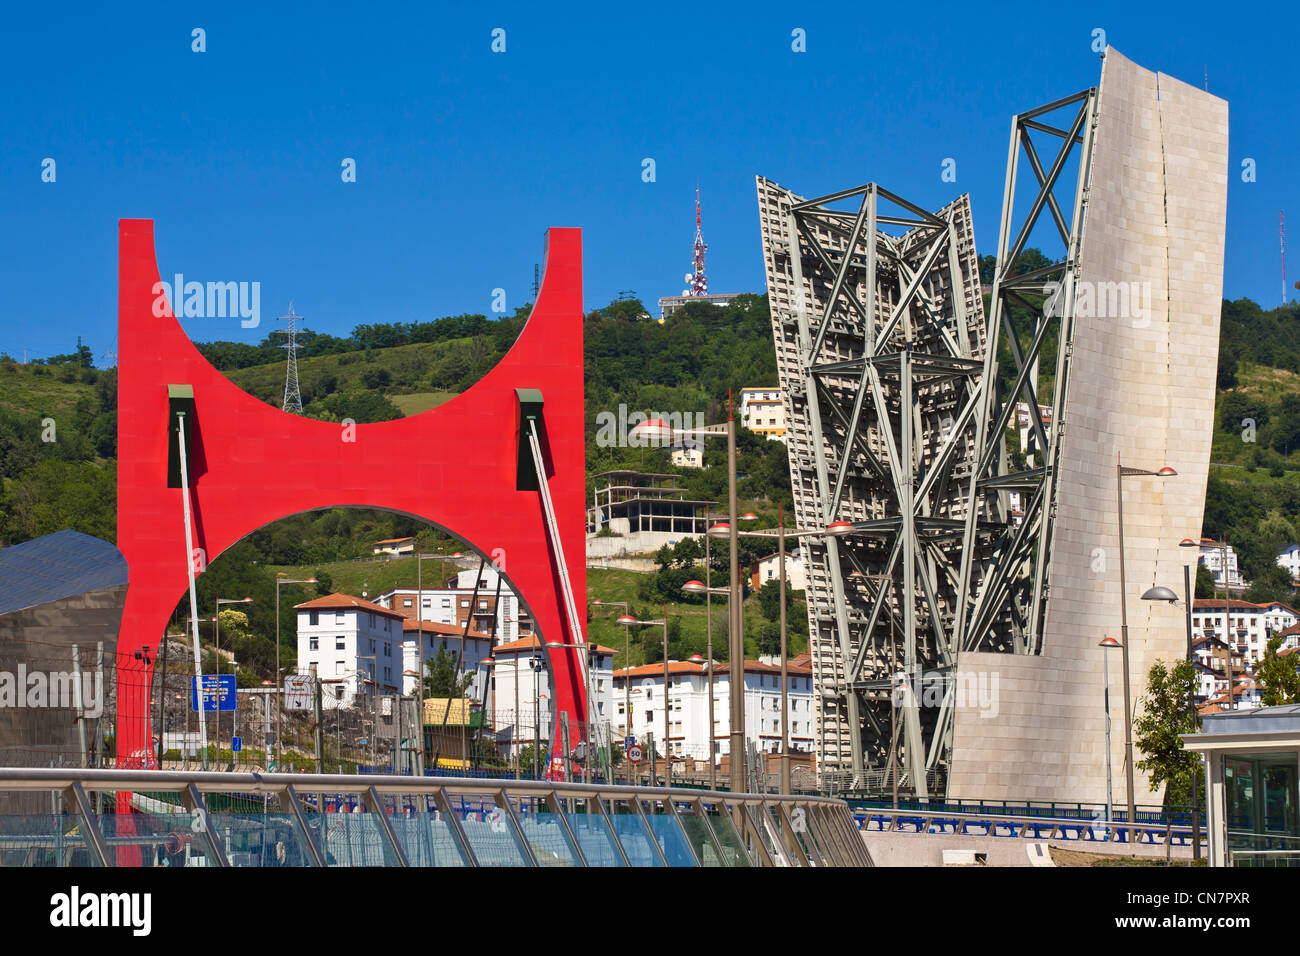 Spain, Biscaye, Spanish Basque Country, Bilbao, the Salve bridge with Les Arches Rouges artpiece by French artist Daniel Buren Stock Photo